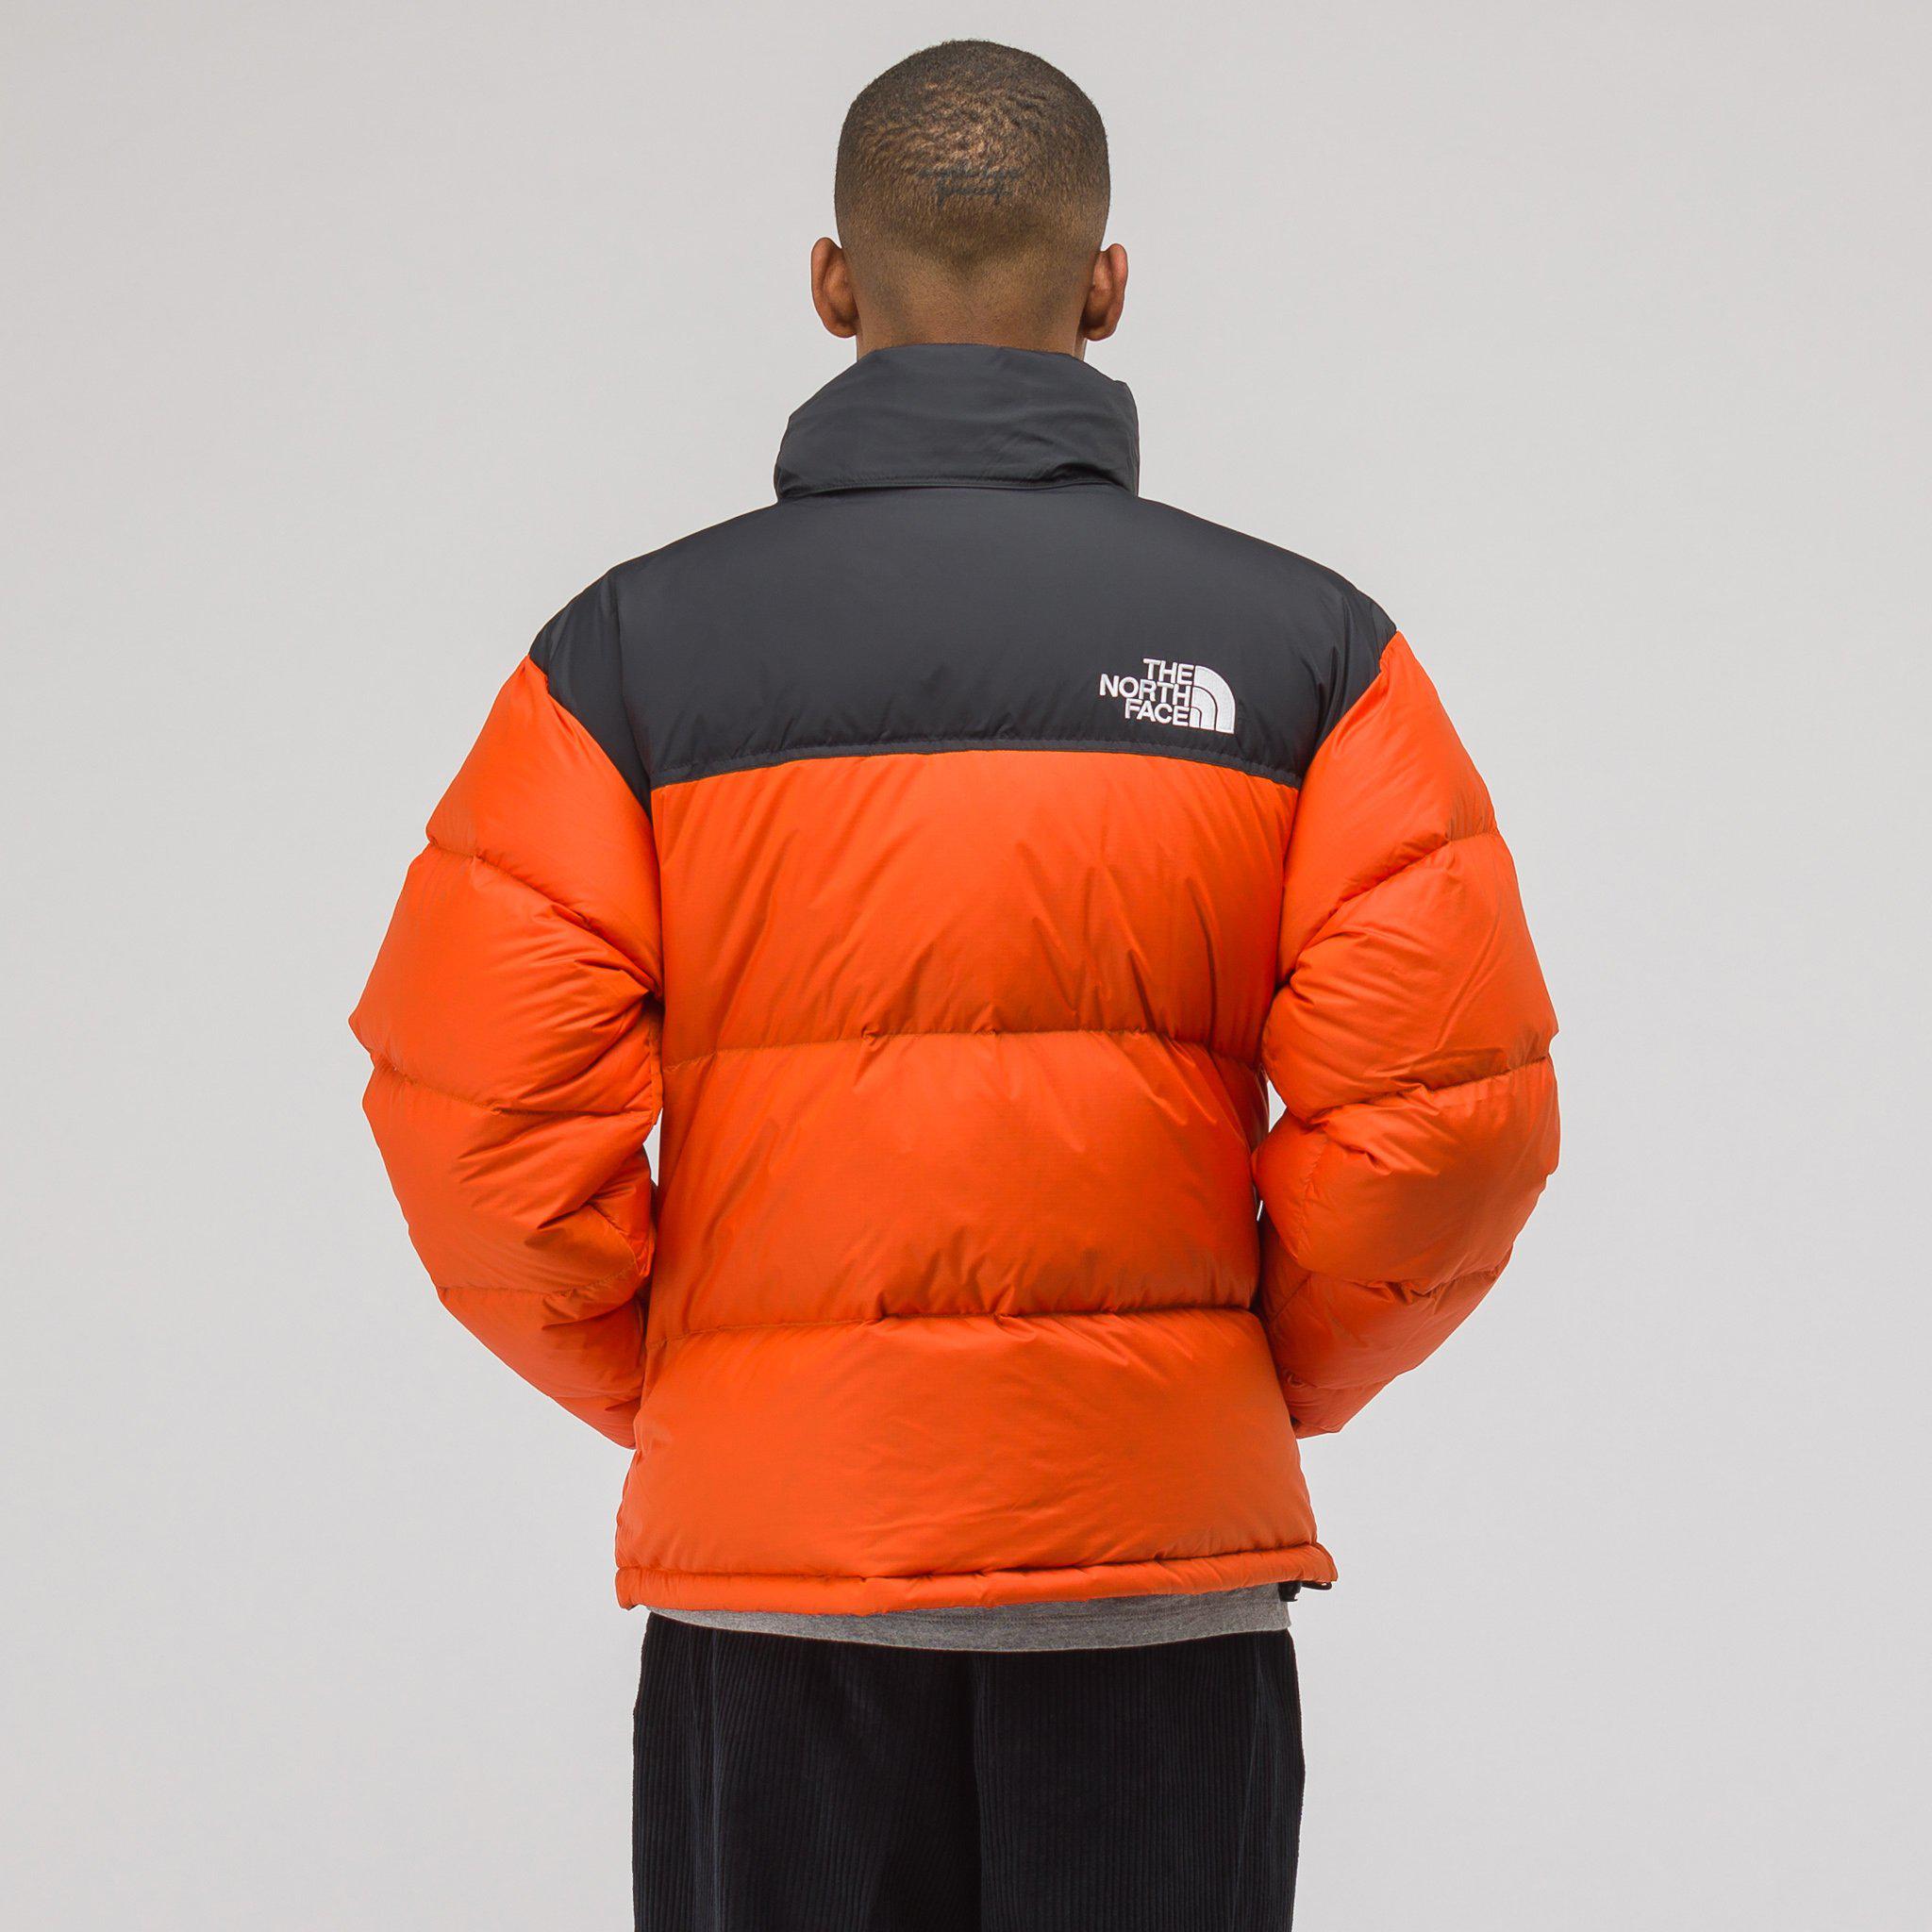 Lyst - The North Face Nuptse 1996 Jacket in Orange for Men